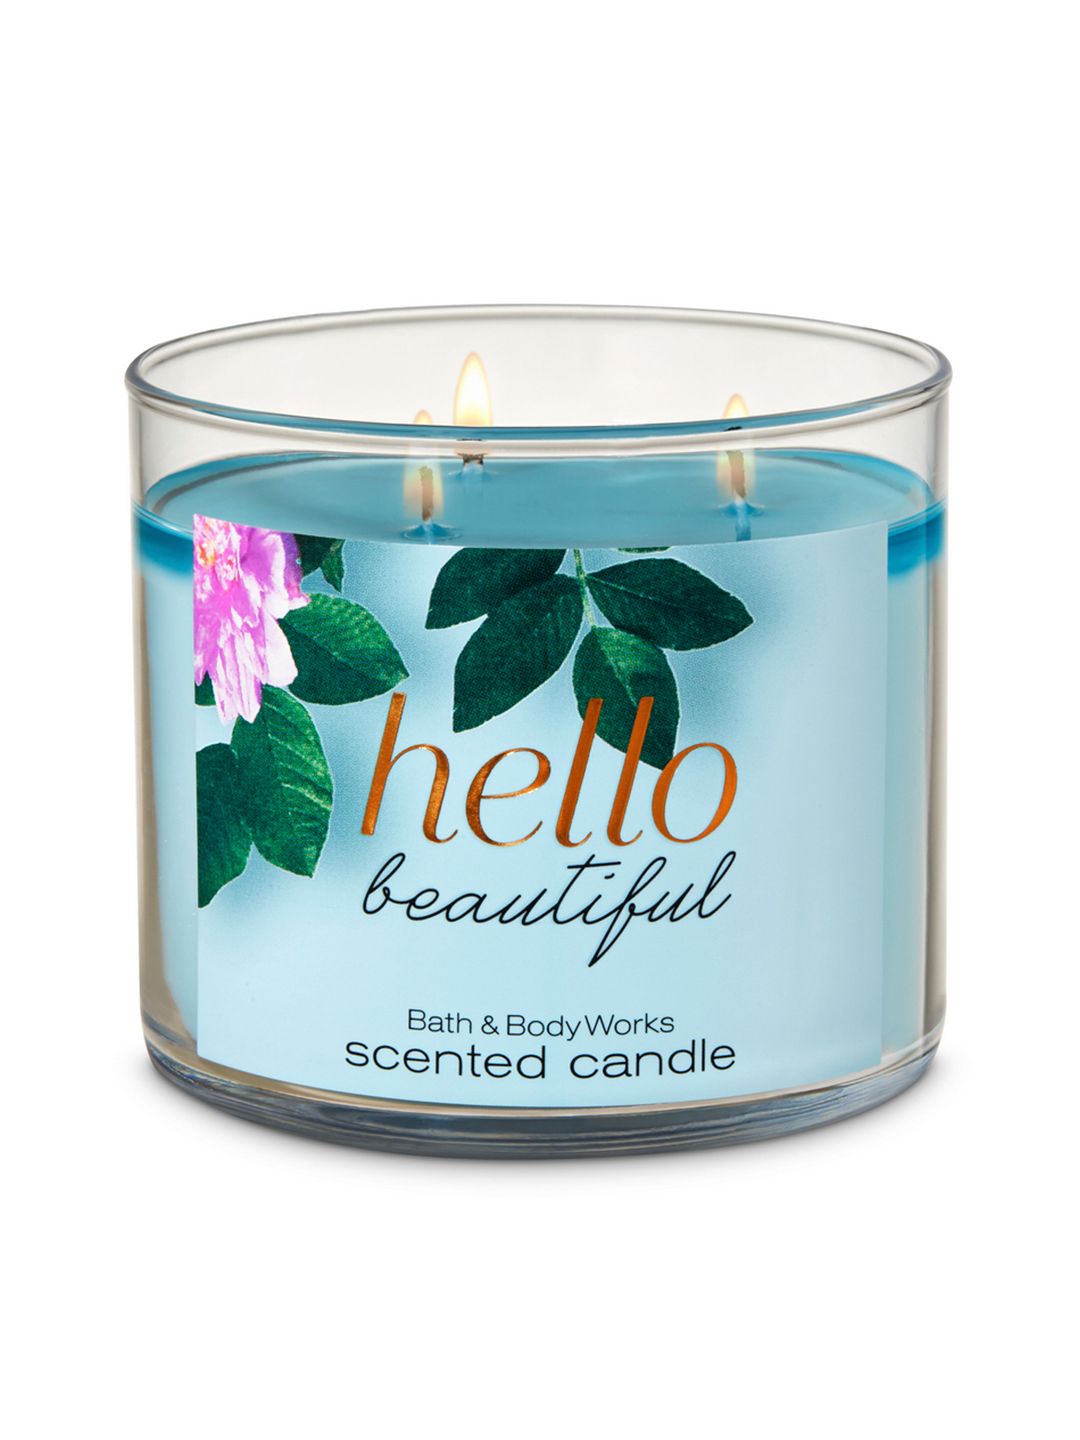 Bath & Body Works Hello Beautiful 3-Wick Candle 411 g Price in India